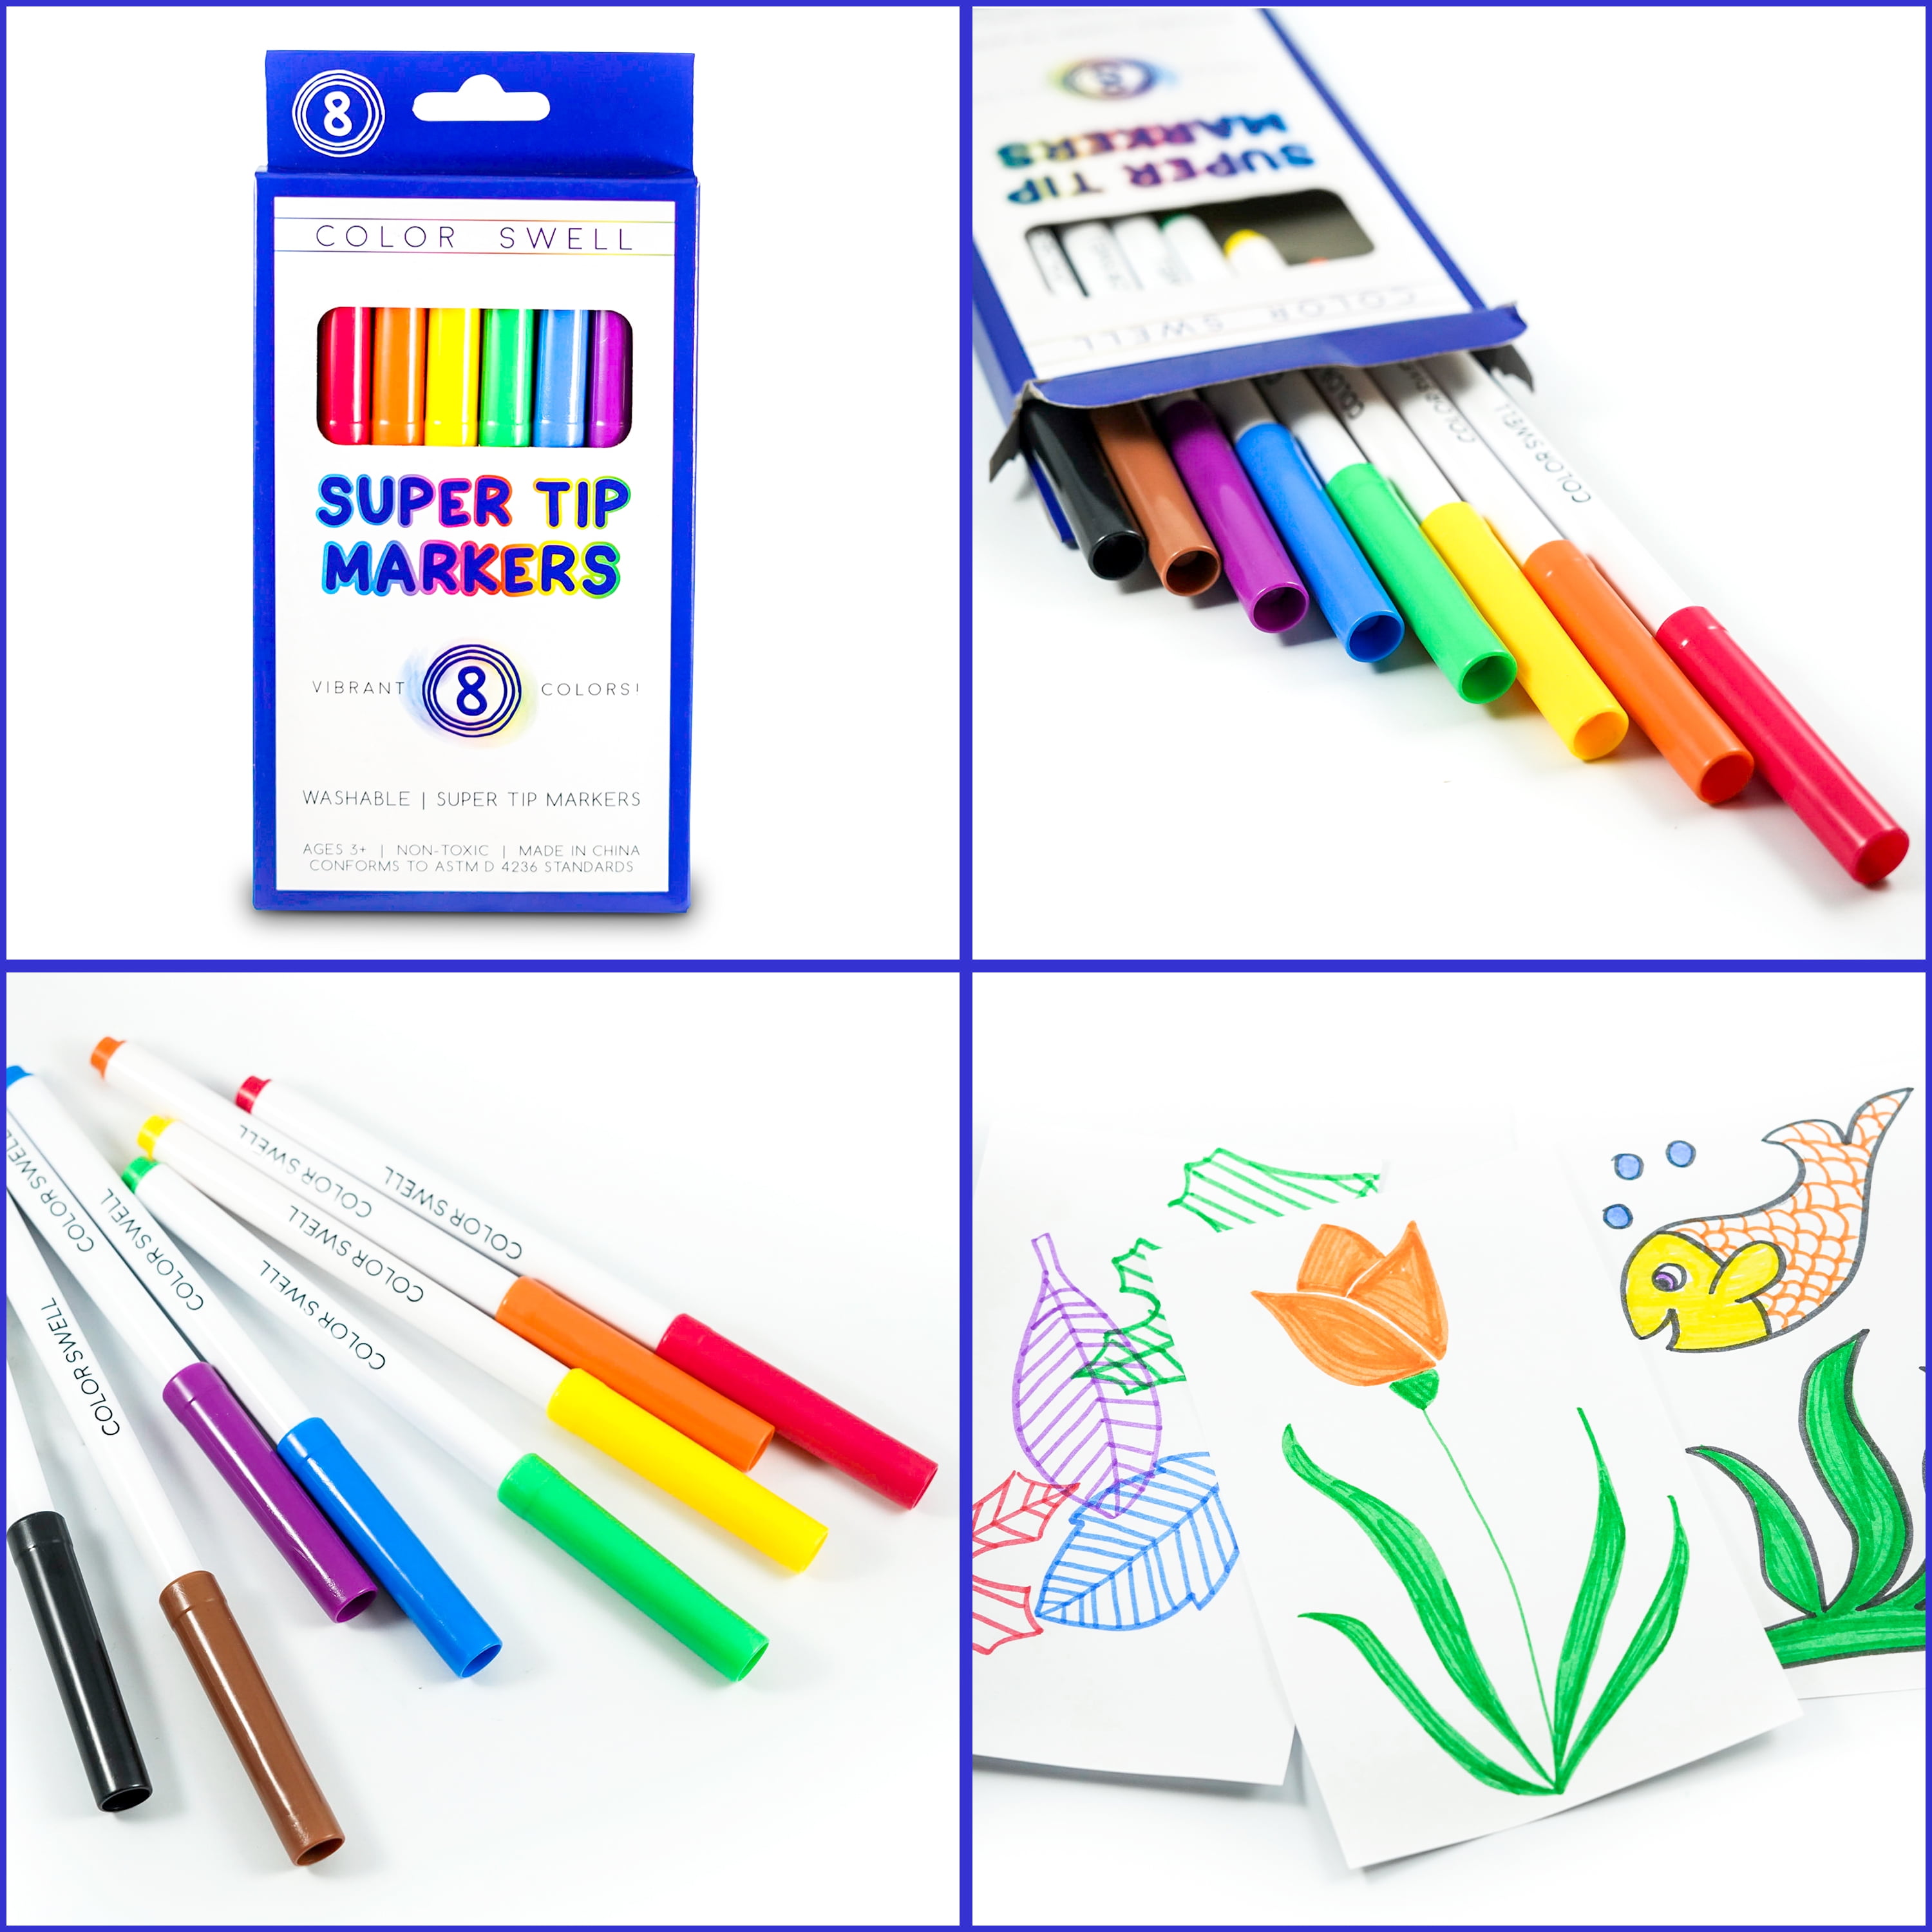 48 Total Perfect for Kids Color Swell Super Tip Washable Markers Bulk Pack 6 Boxes of 8 Vibrant Colors Parties Classrooms 